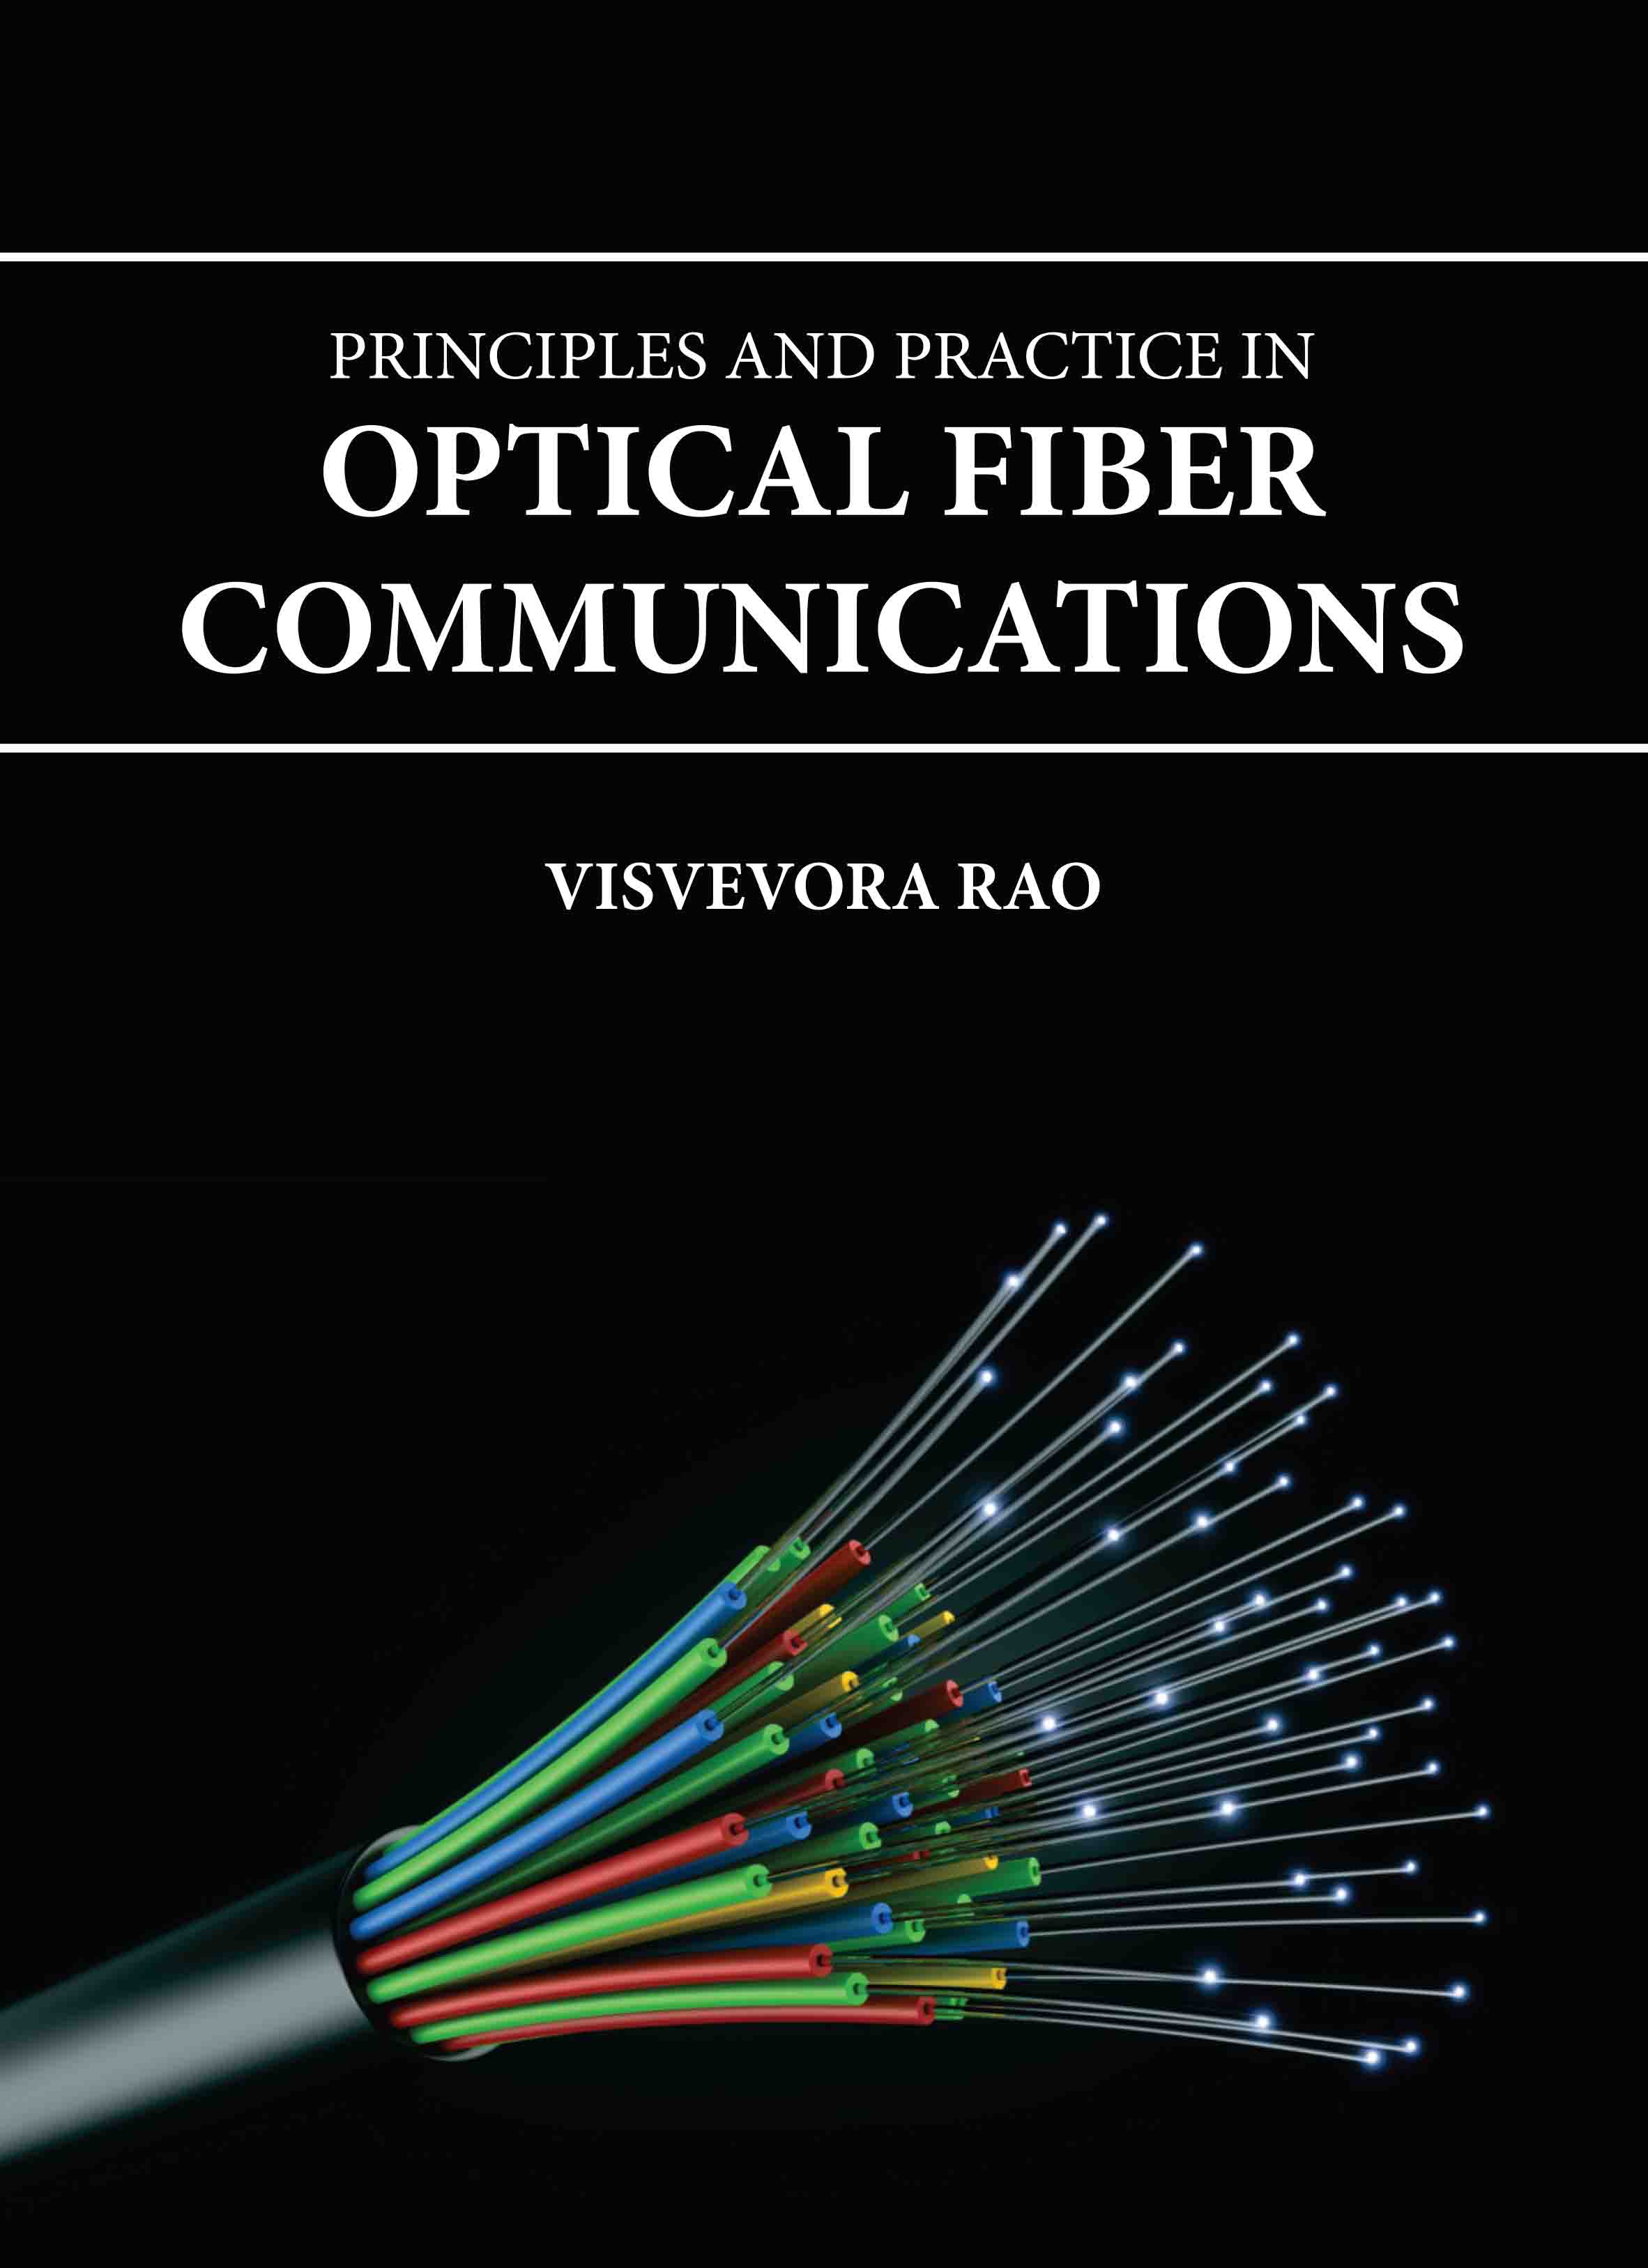 Principles and Practice in Optical Fiber Communications